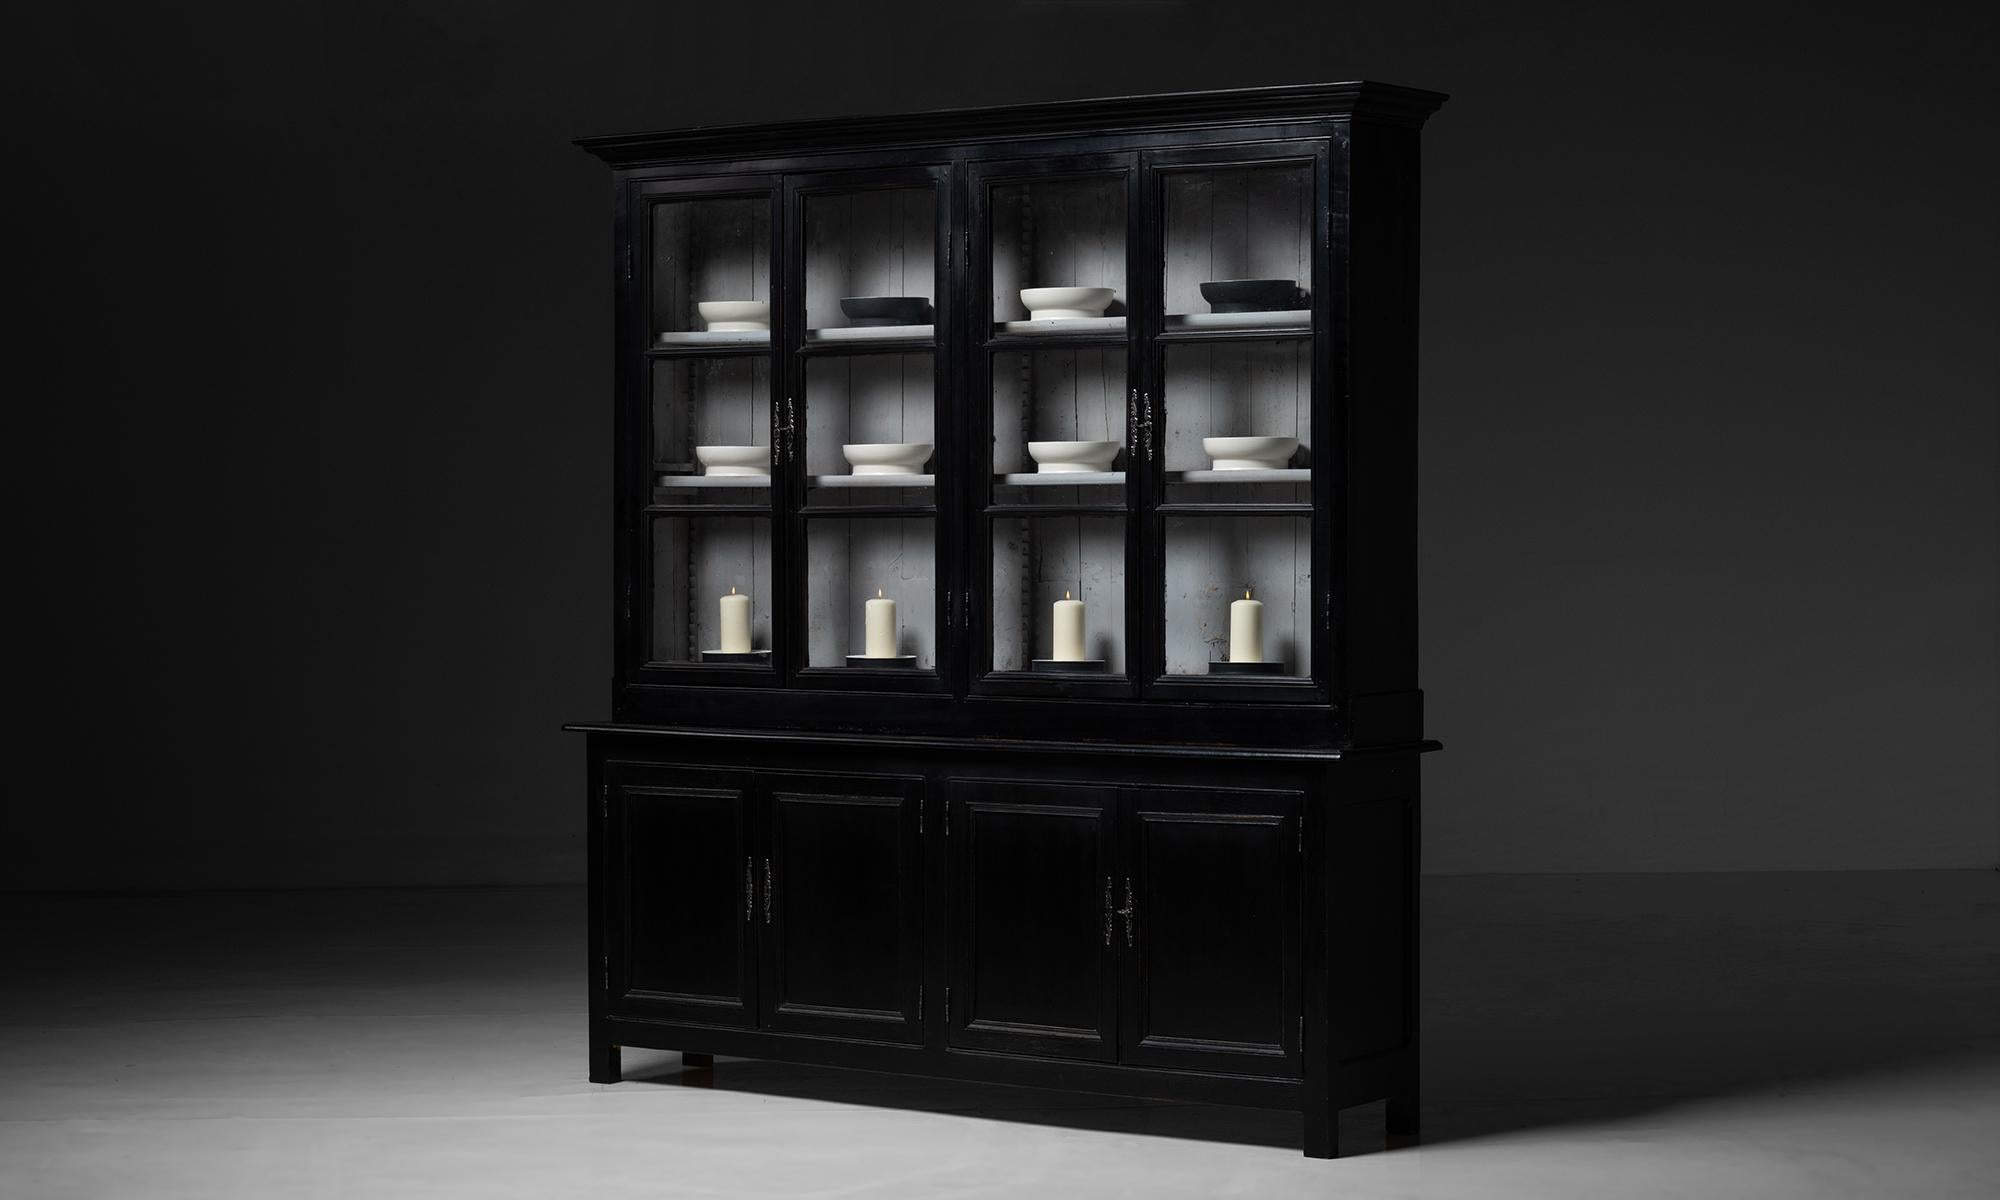 Ebonised Pharmacy Cabinet

England circa 1900

Glass door shelving cabinet with original period paint.

59”w x 23.5”d x 91”h